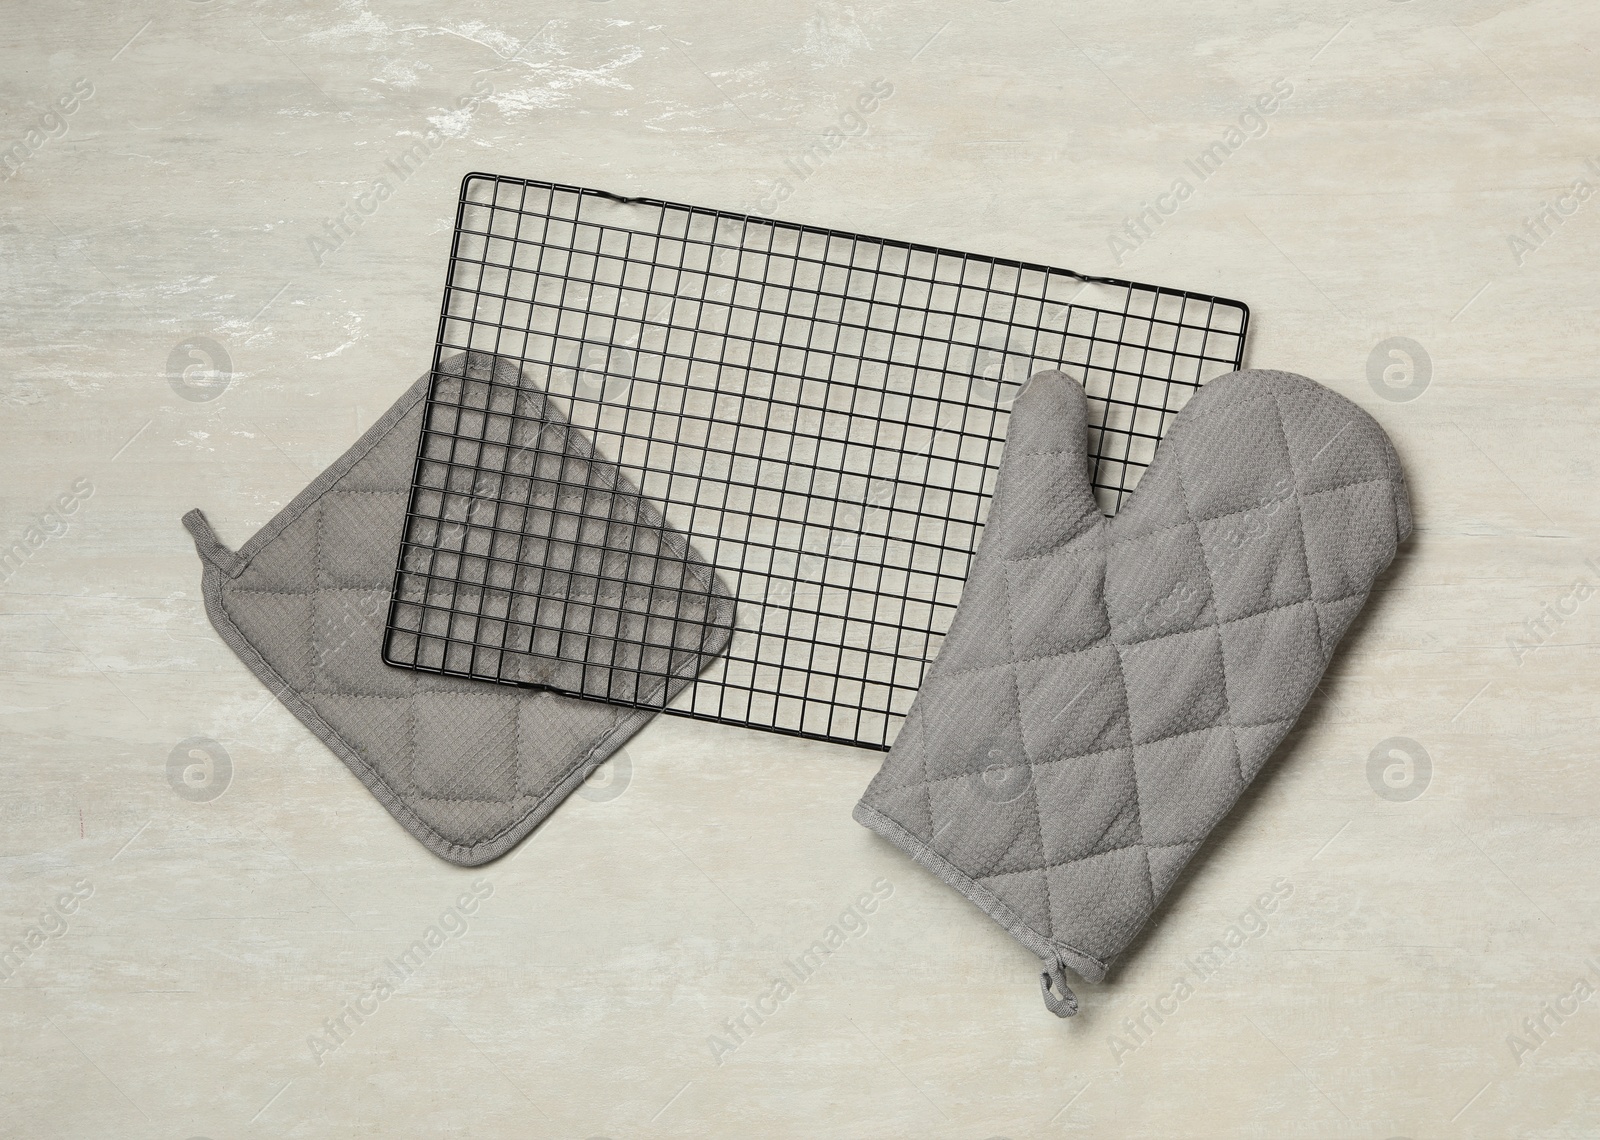 Photo of Oven mitt, potholder and cooling rack on grey table, flat lay. Cooking utensils